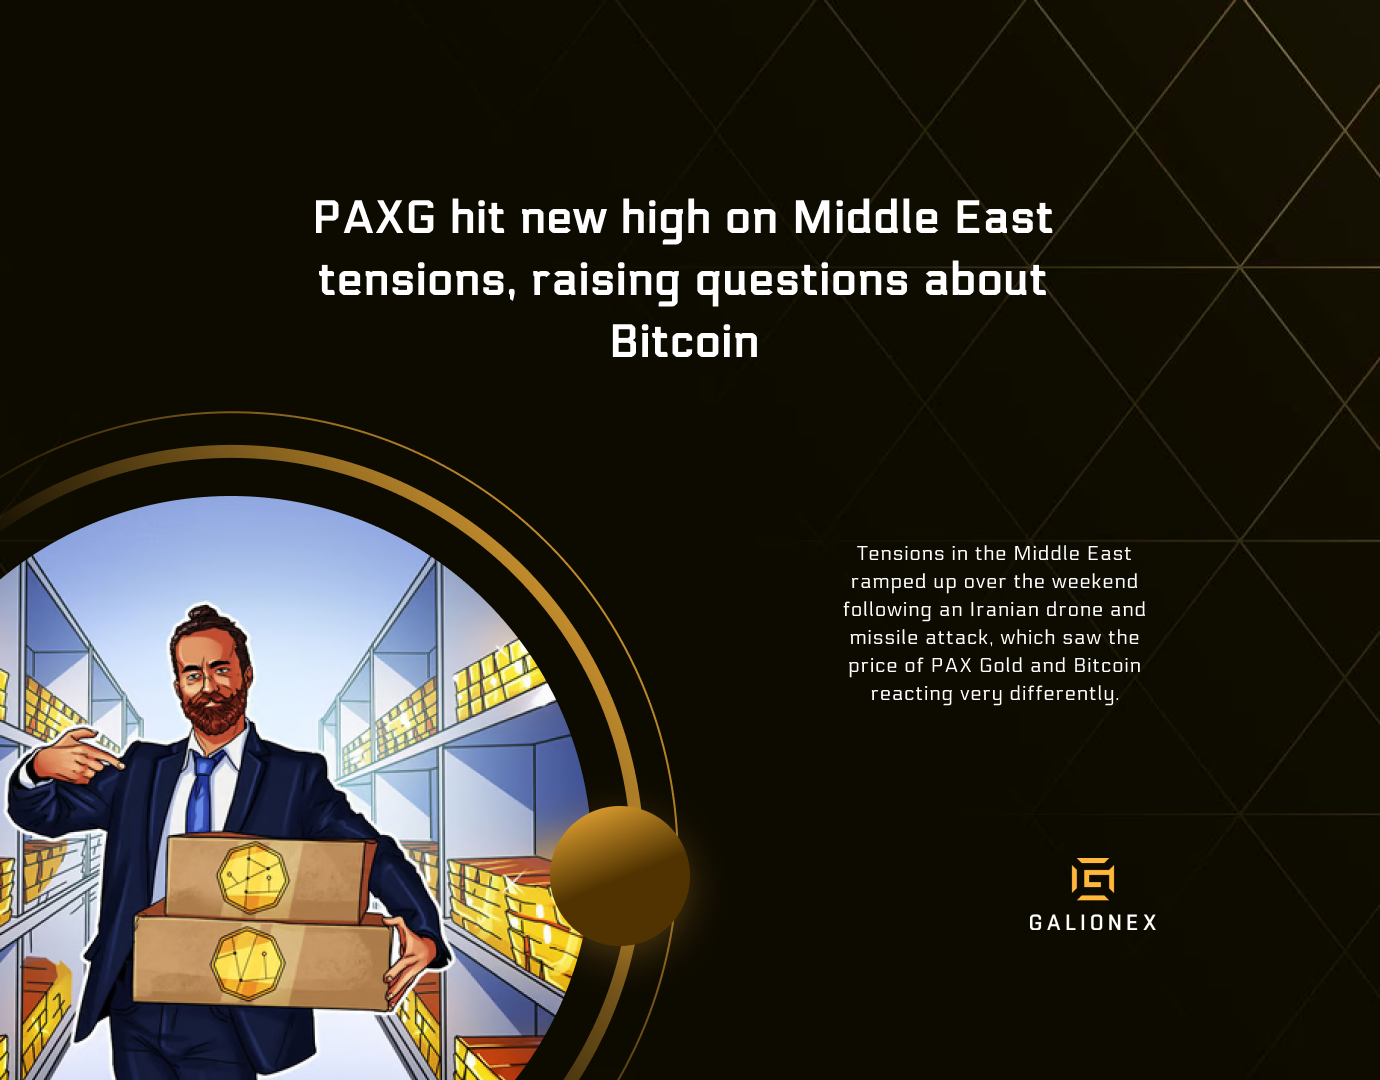 PAXG hit new high on Middle East tensions, raising questions about Bitcoin